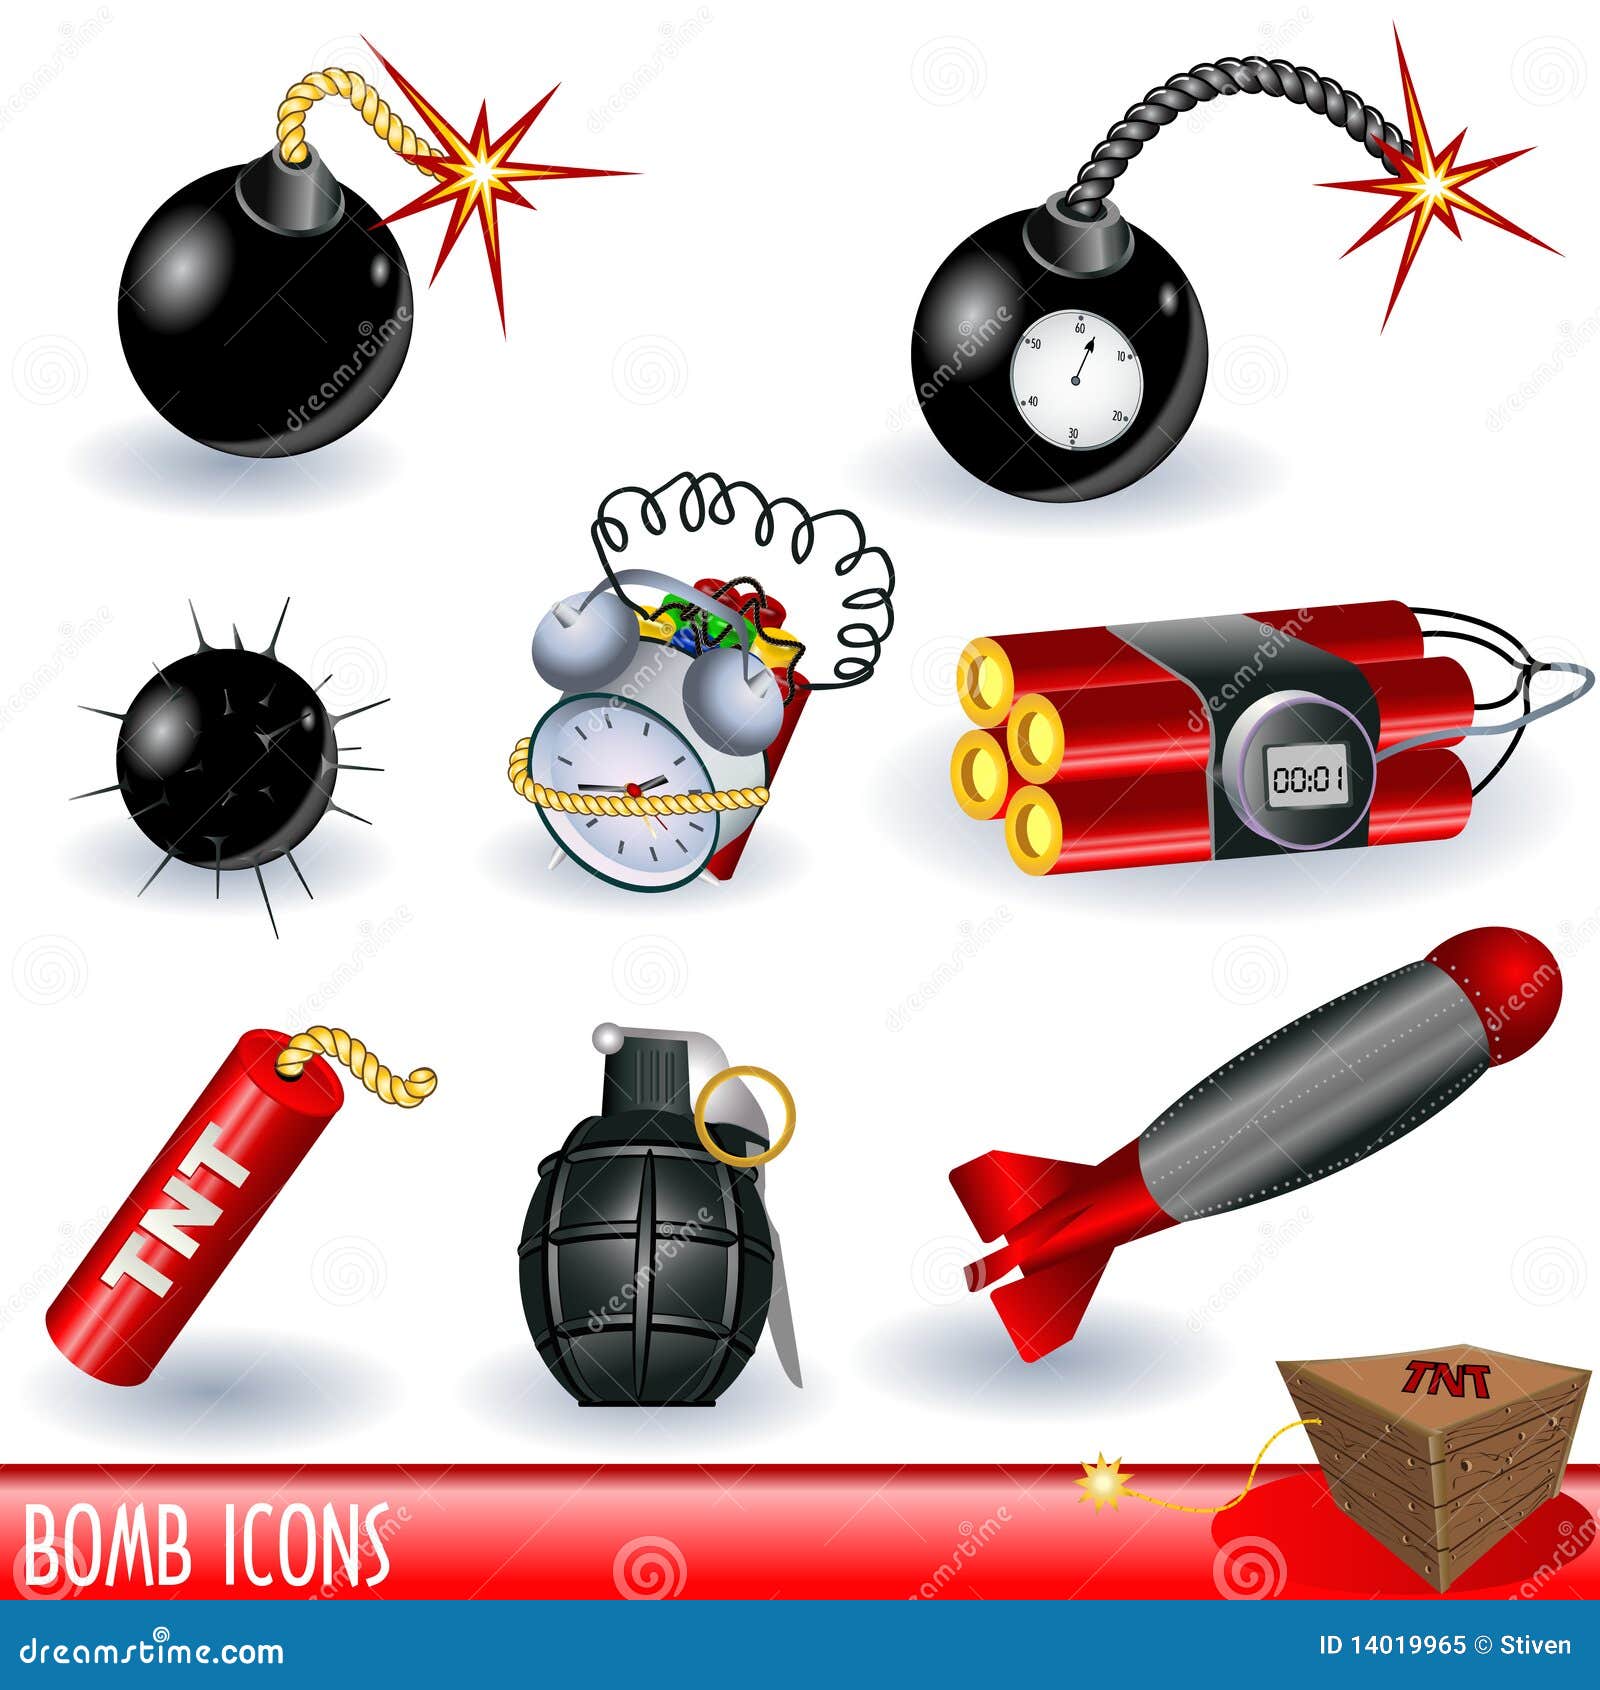 Bomb icons stock vector. Illustration of shiny, symbol ... fuse box stock photos pictures royalty free 